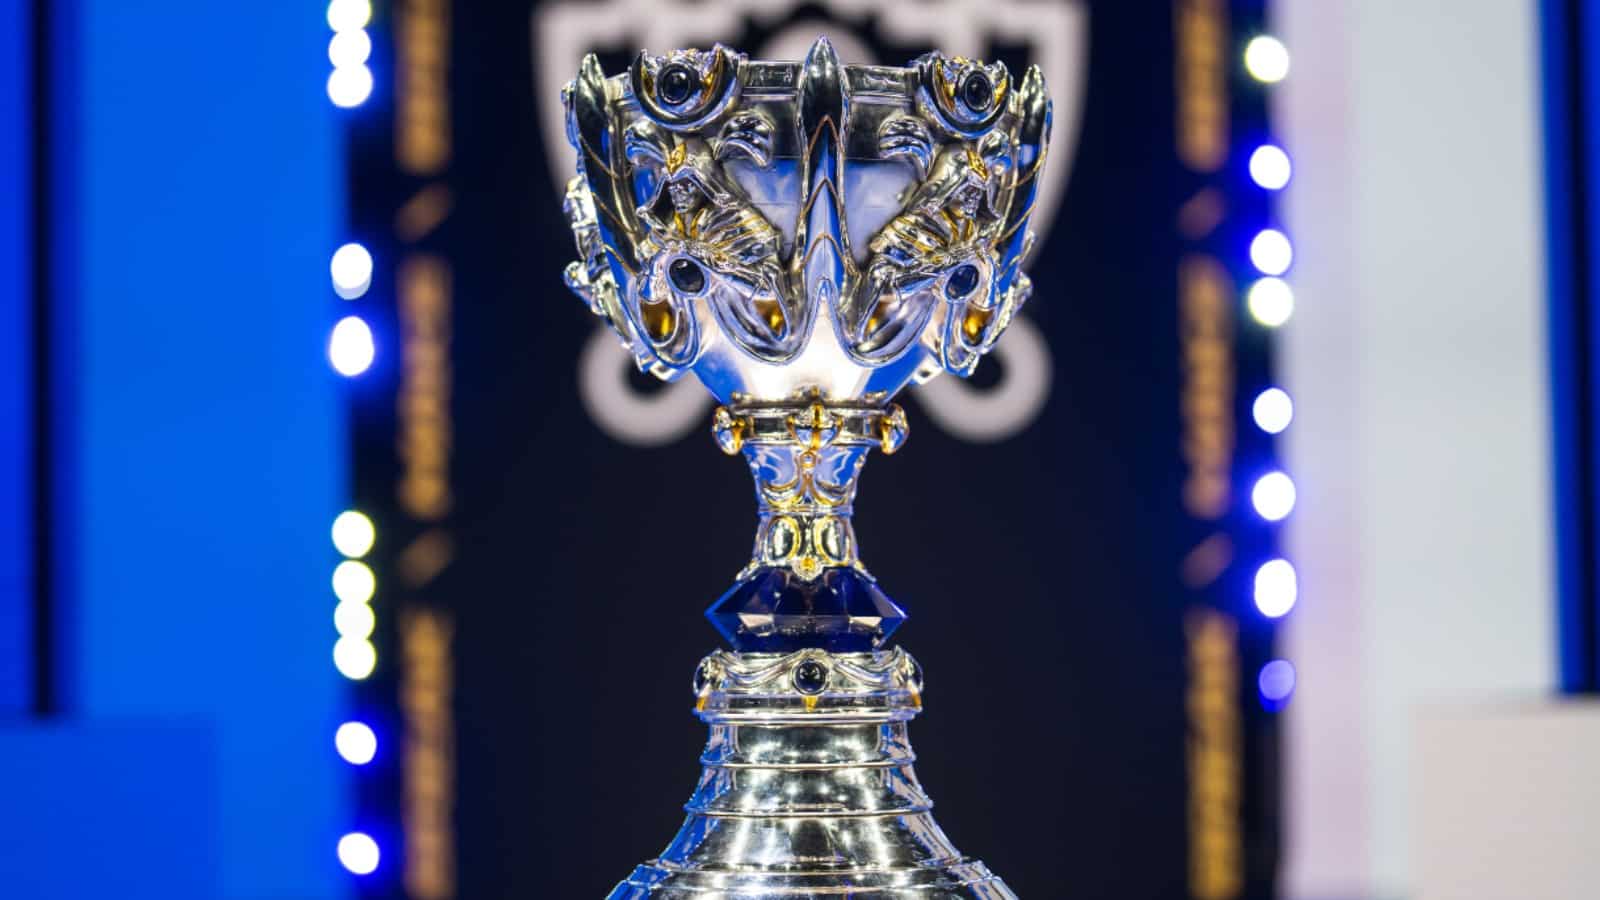 Image of the Worlds trophy